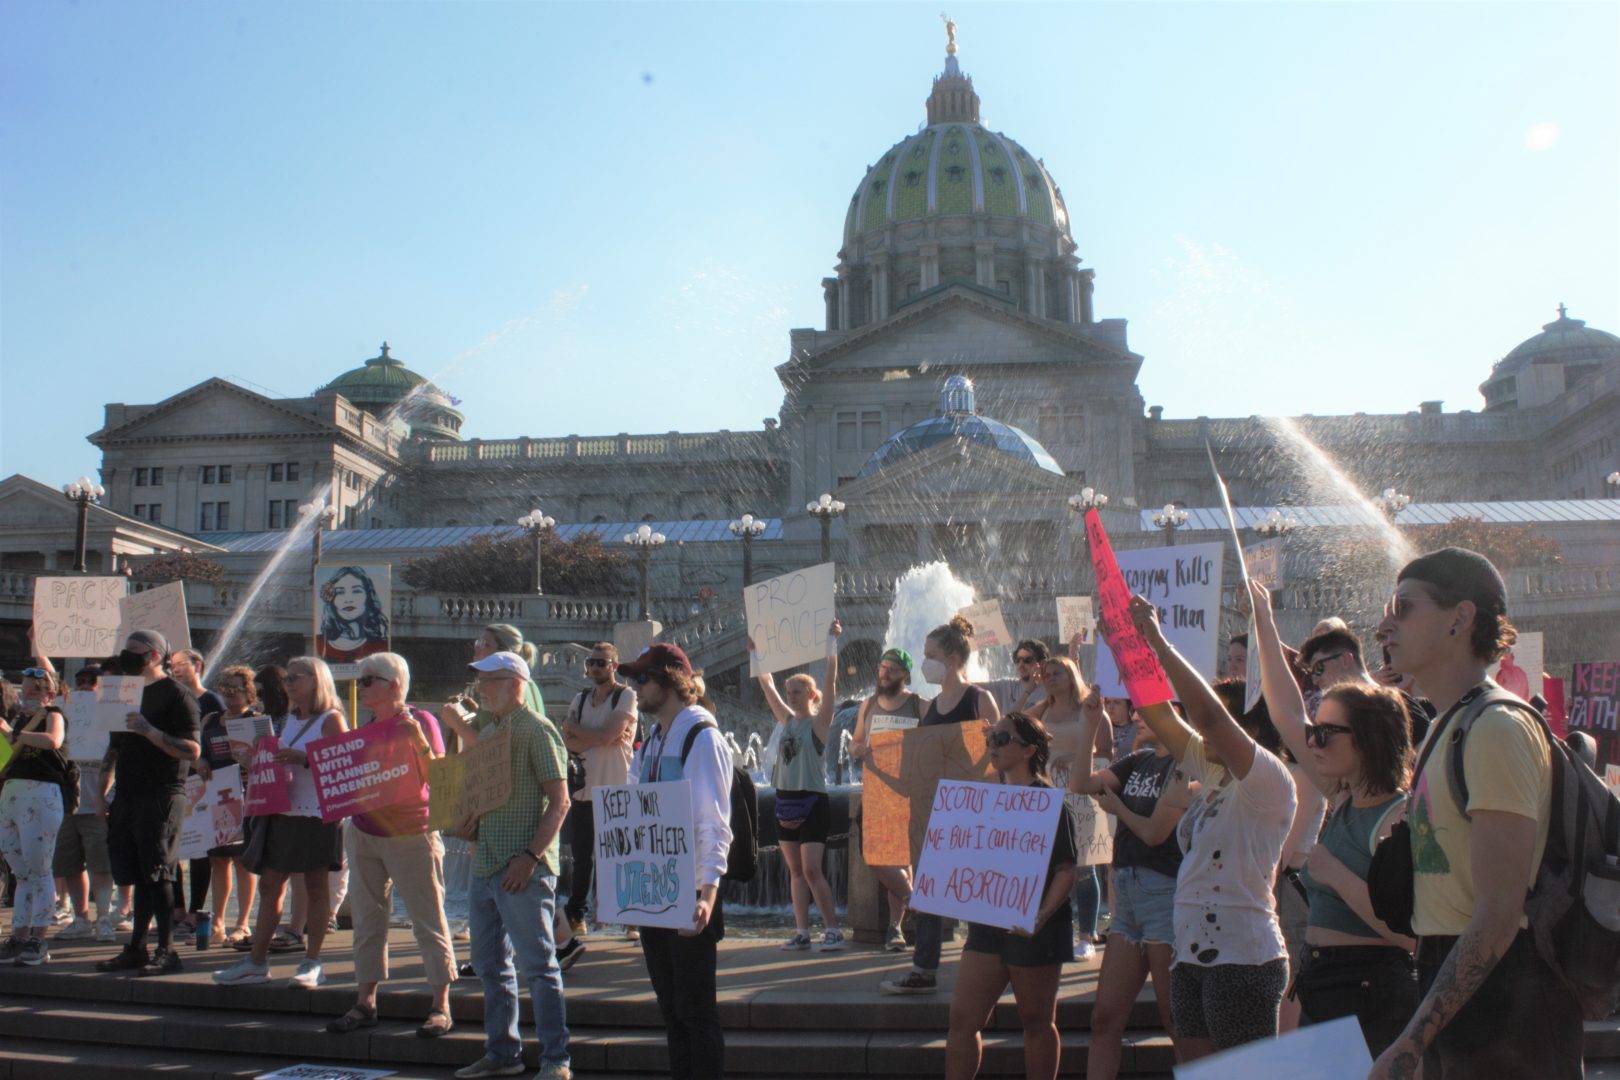 About 80 people protested the end of Roe v. Wade at the Pennsylvania State Capitol on June 24.